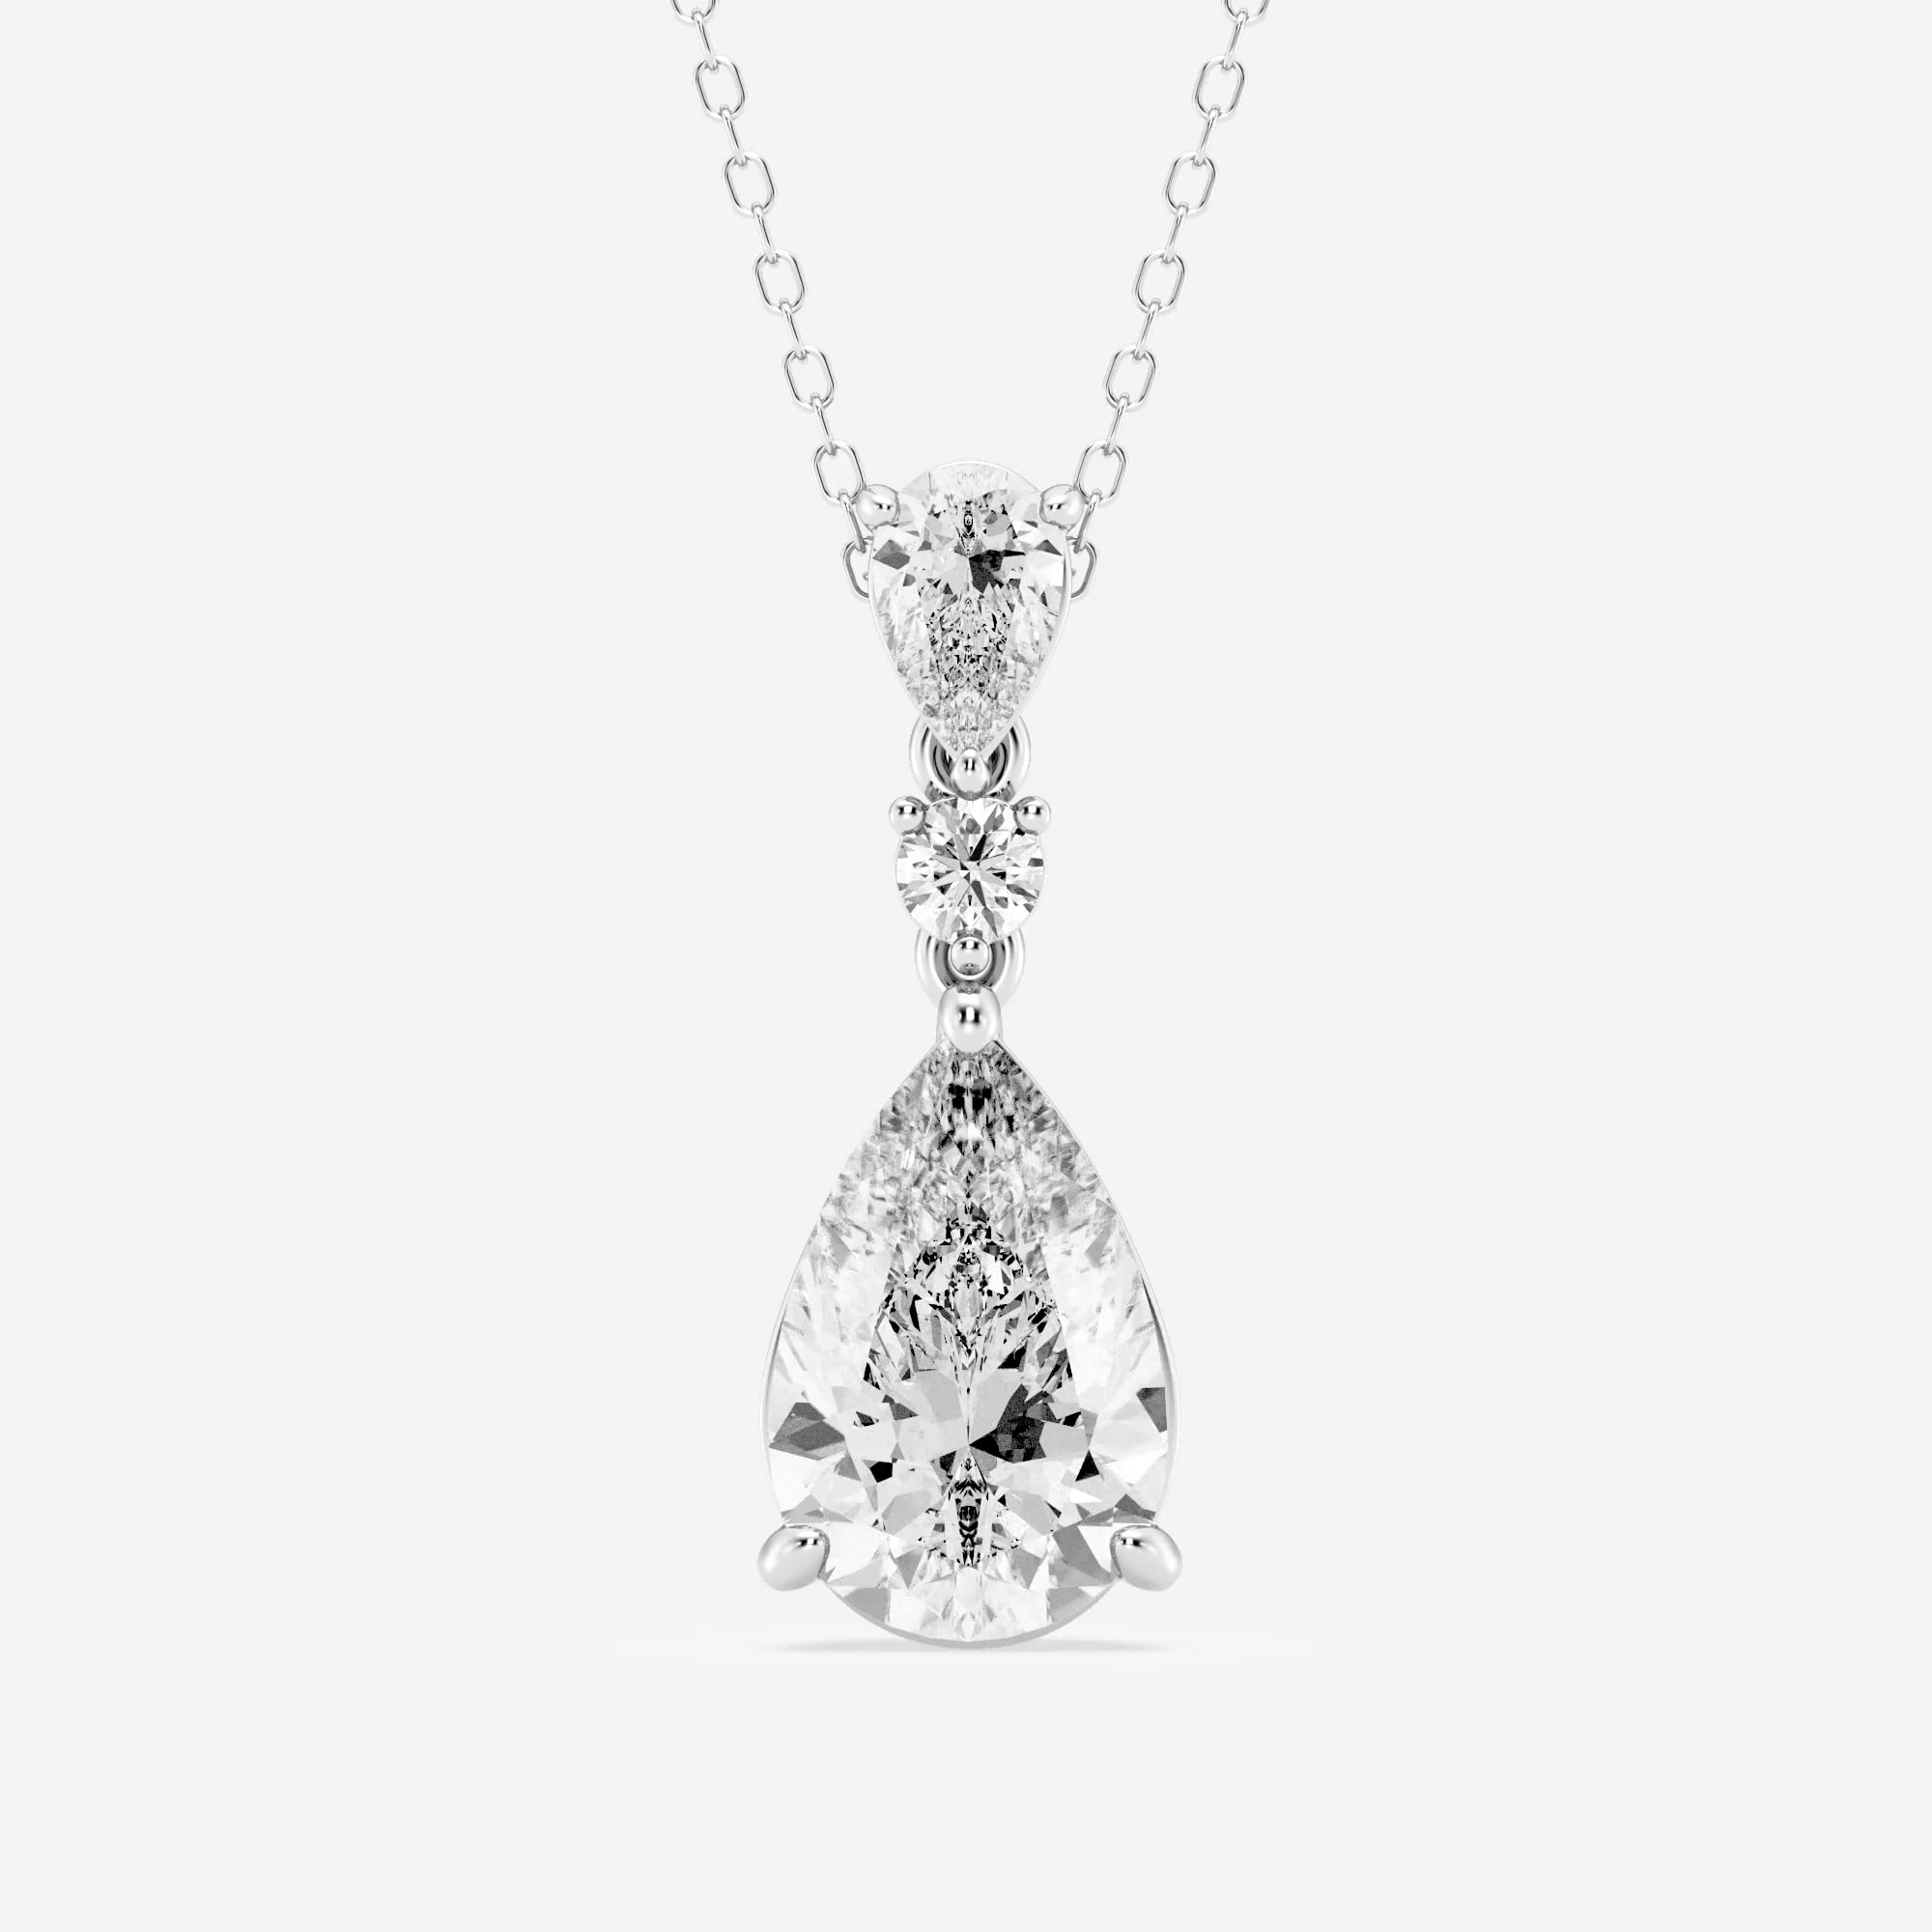 product video for Badgley Mischka Near-Colorless 4 ctw Pear Lab Grown Diamond Hinged Fashion Pendant with Adjustable Chain